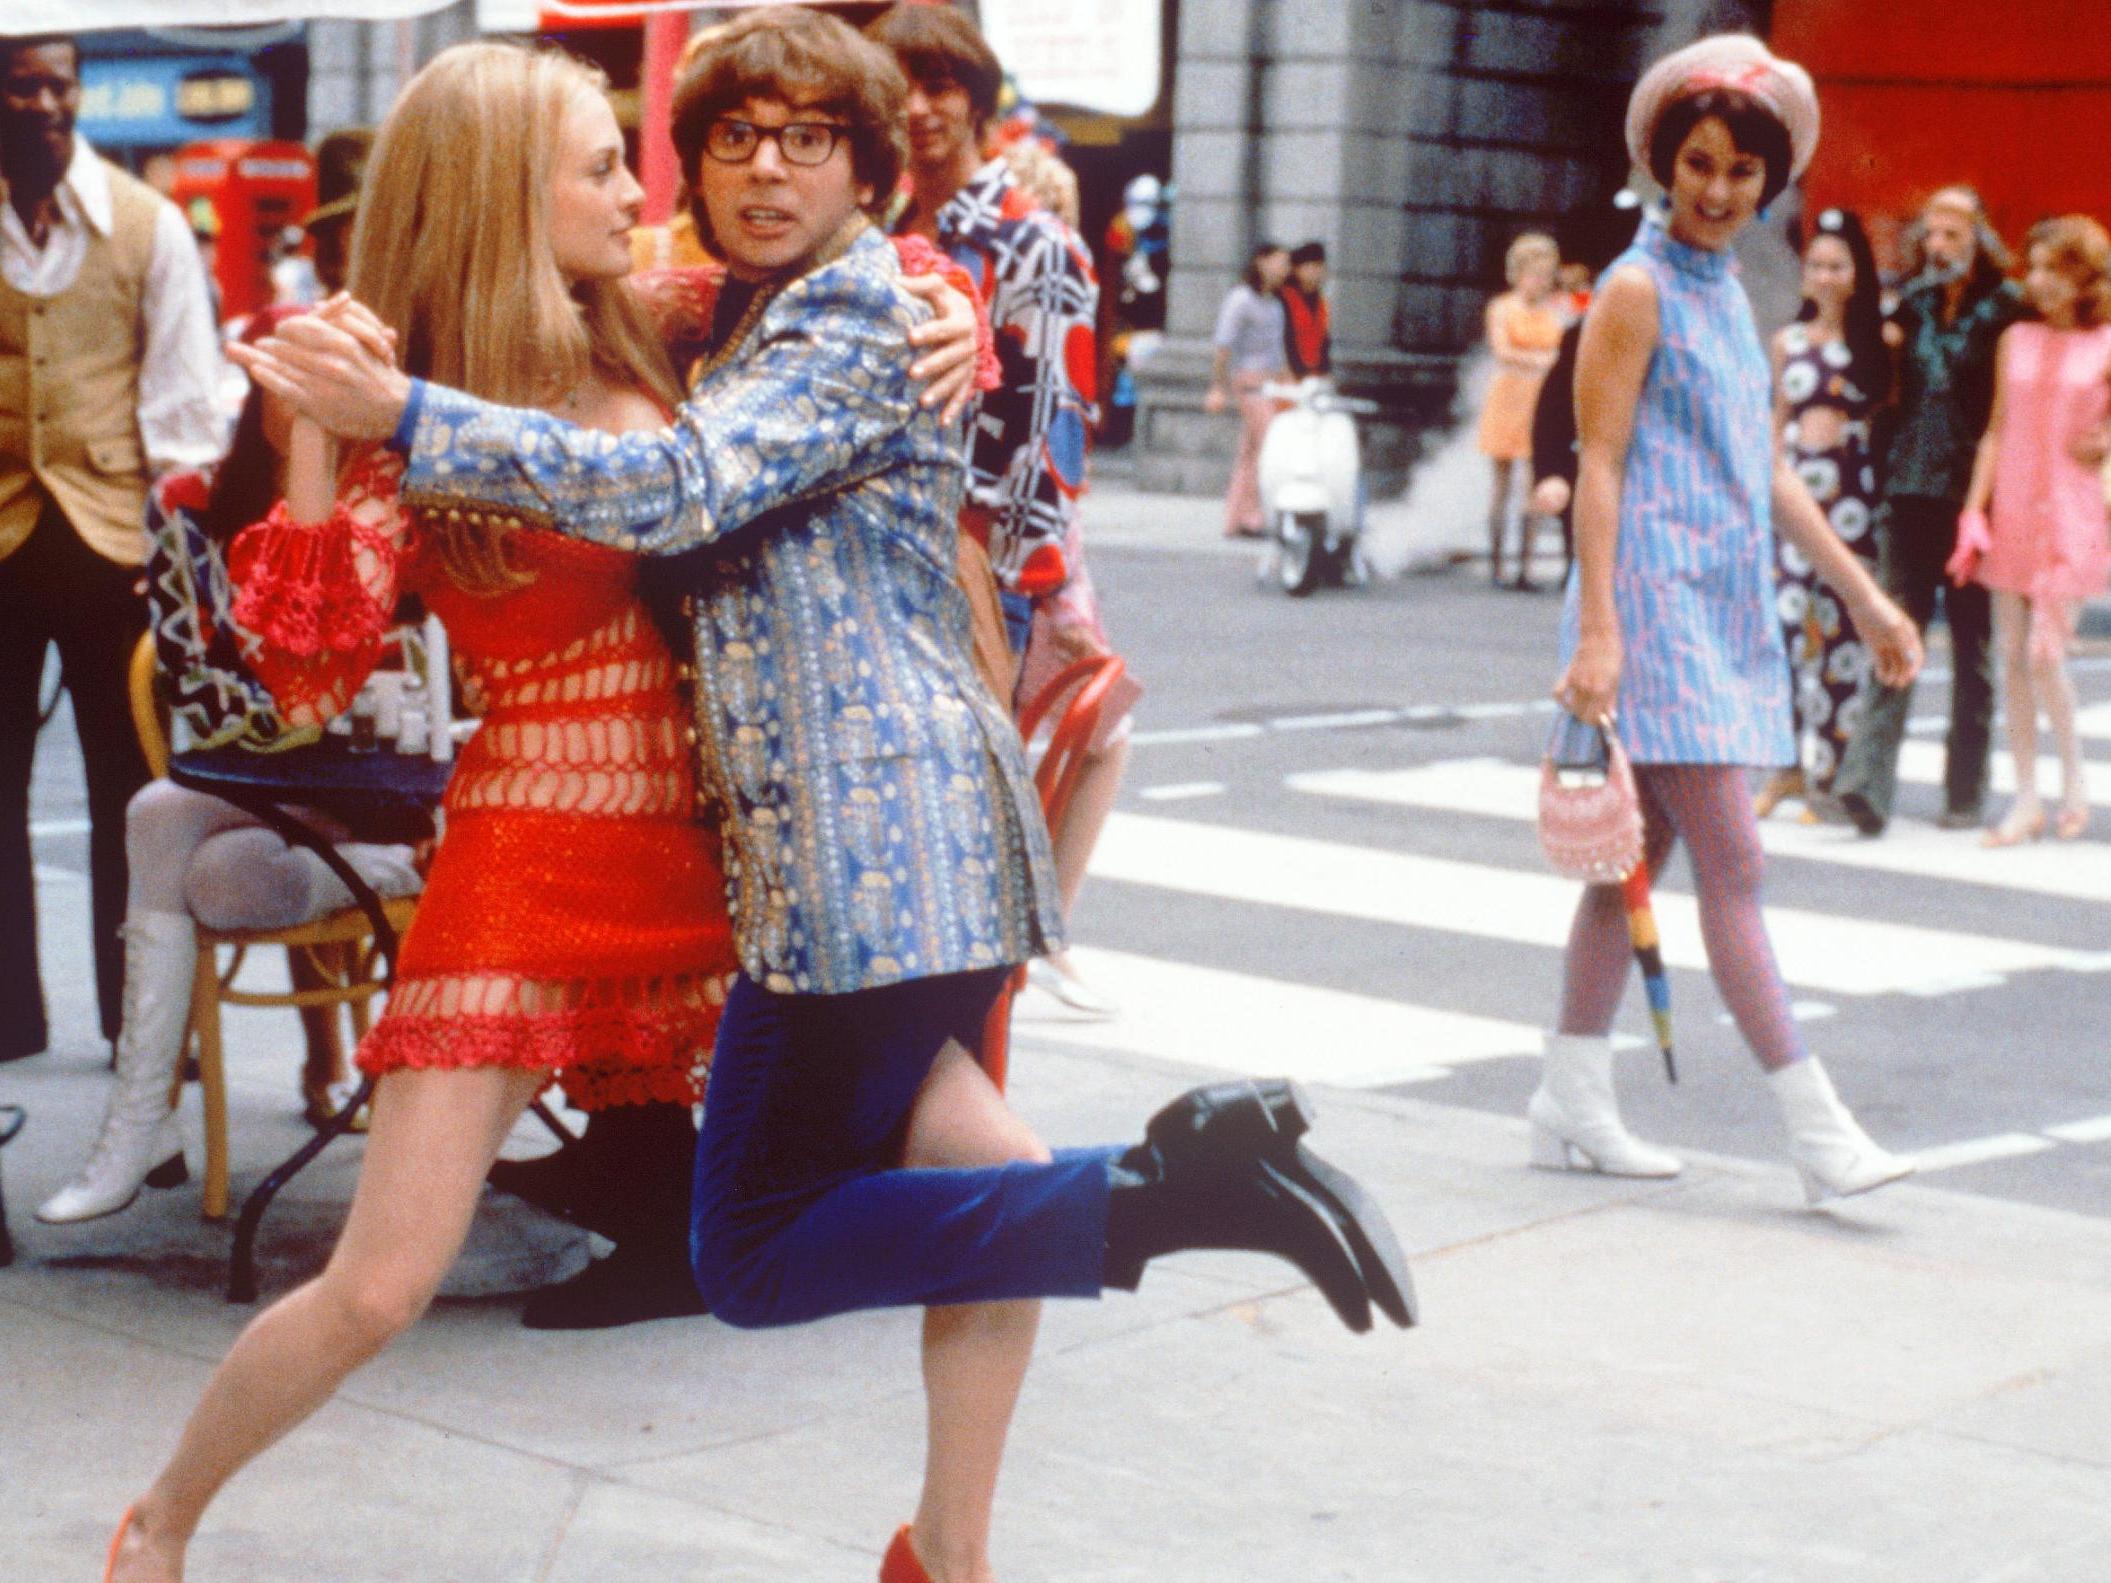 Heather Graham and Mike Myers’ dance scene in ‘Austin Powers 2’